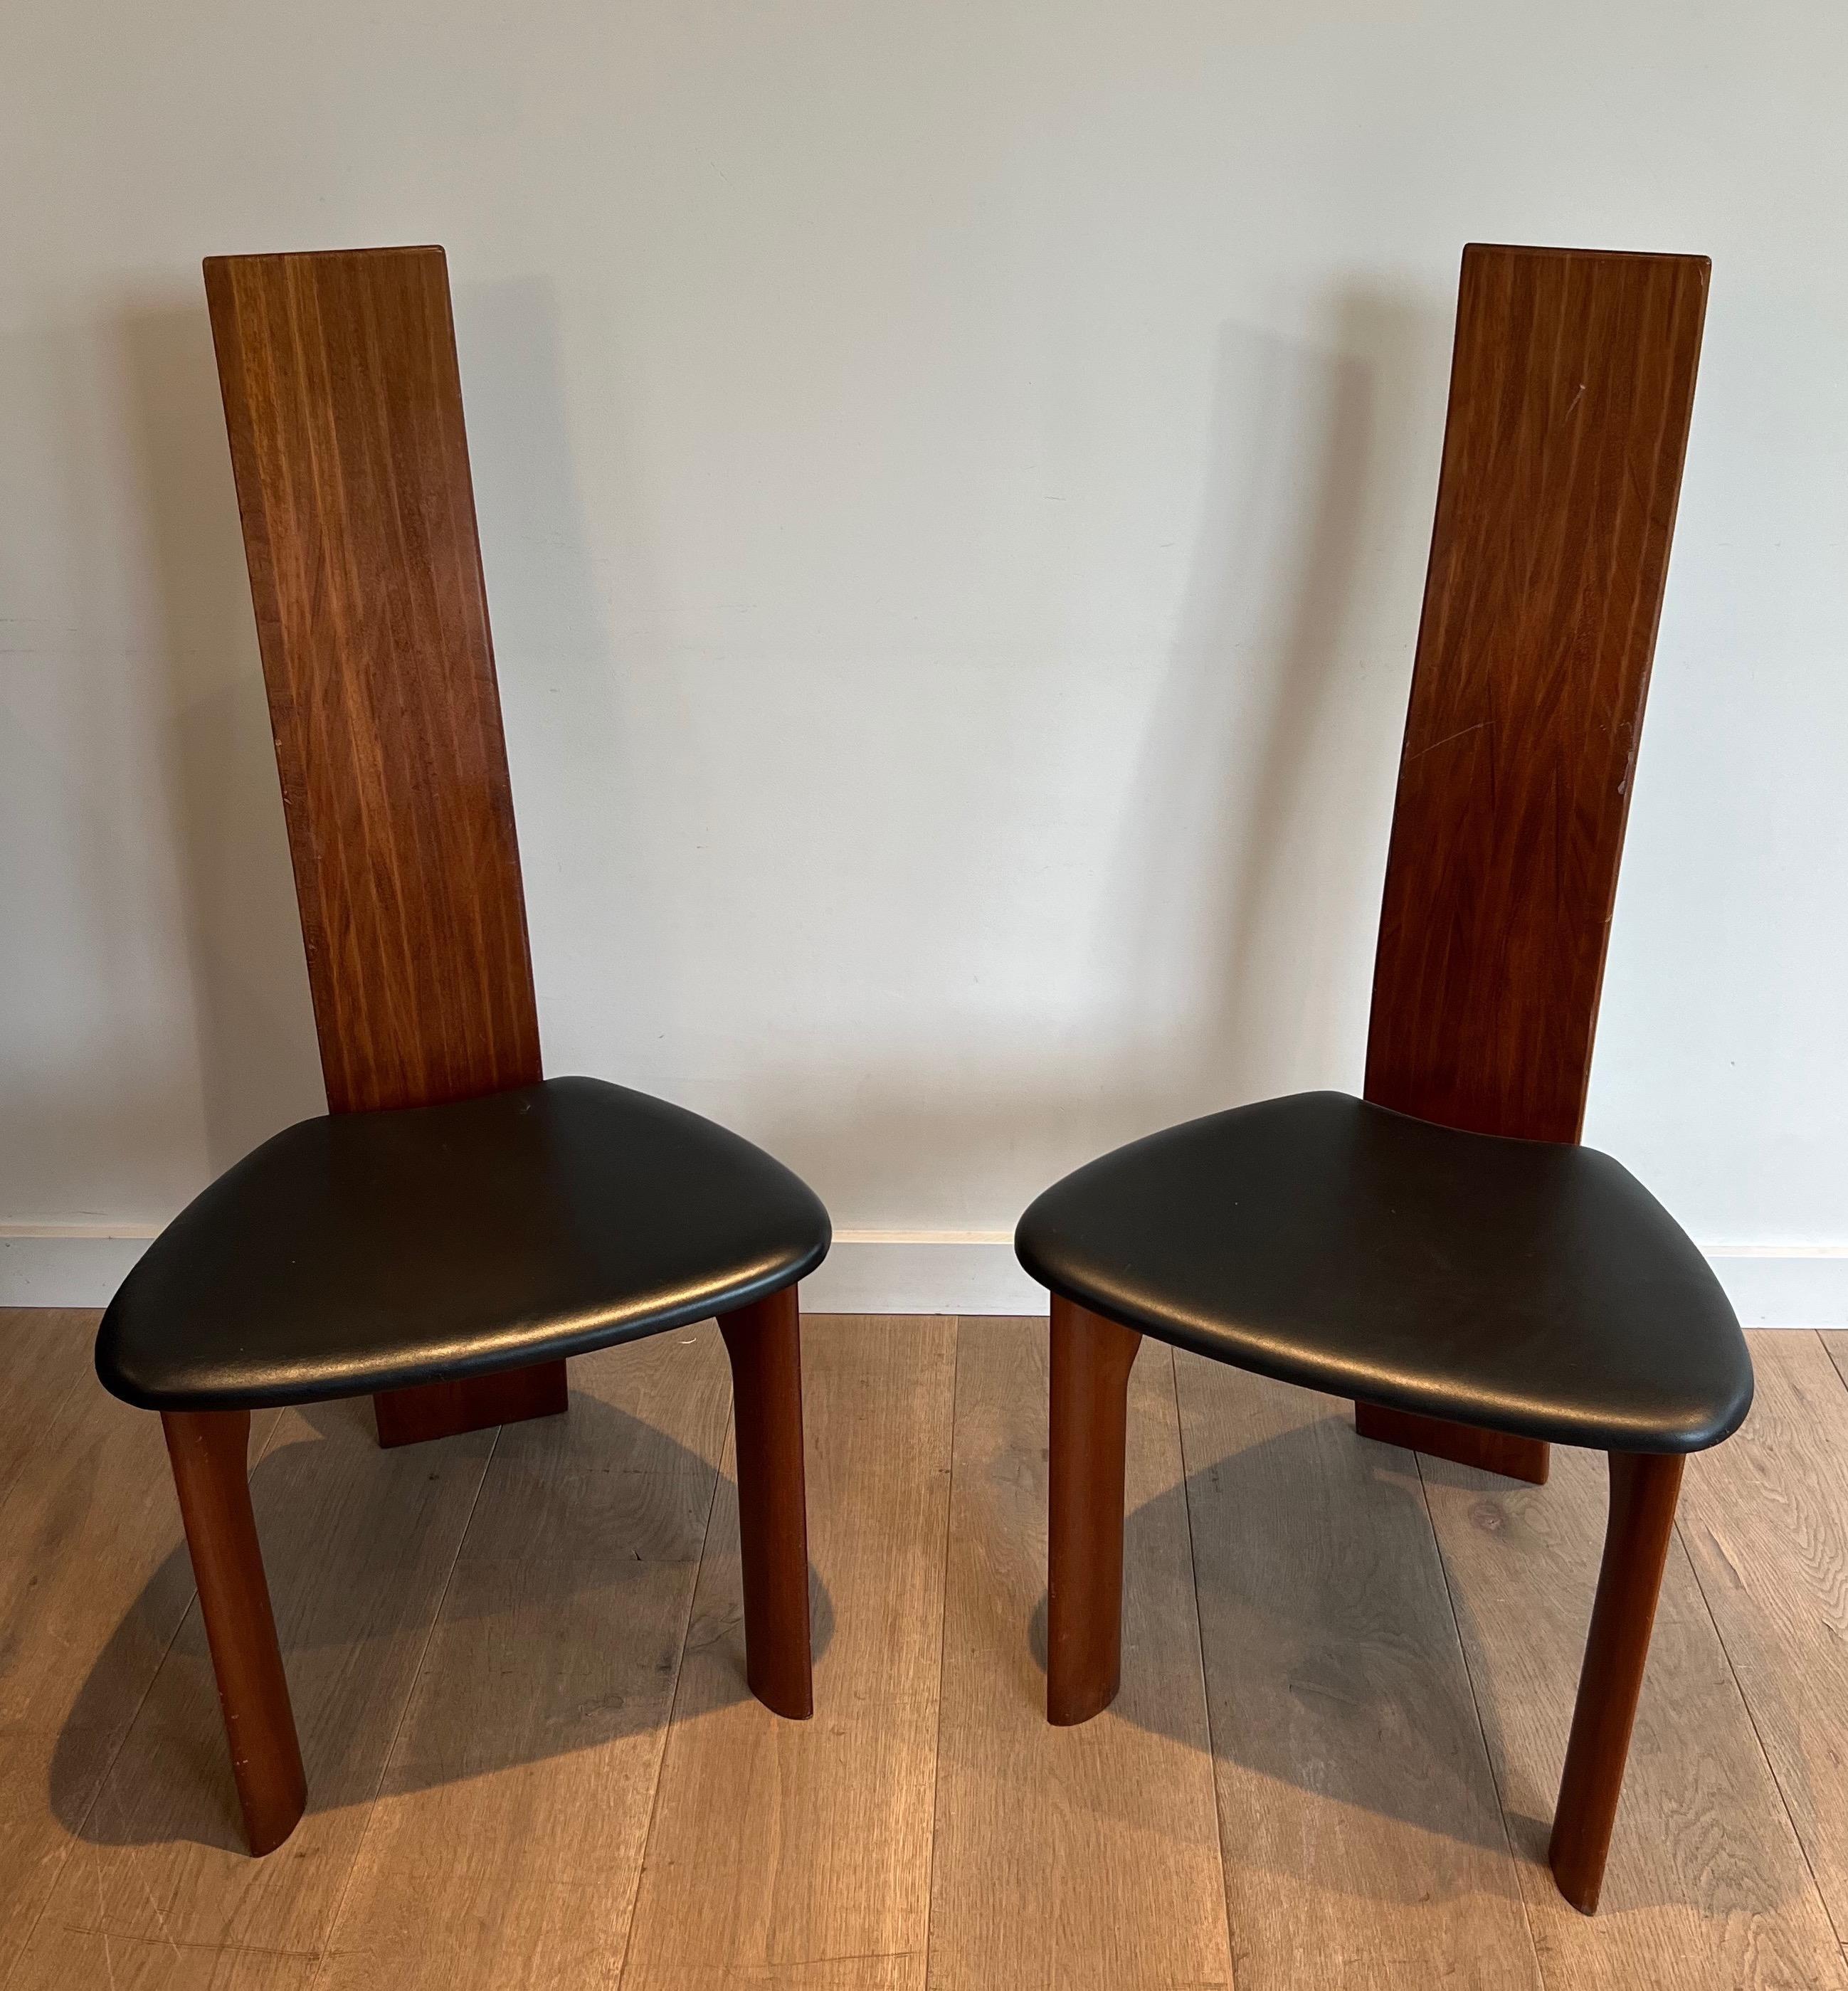 Pair of Exotic Wood and Black Leather Chairs, Scandinavian Work. Circa 1970 For Sale 4